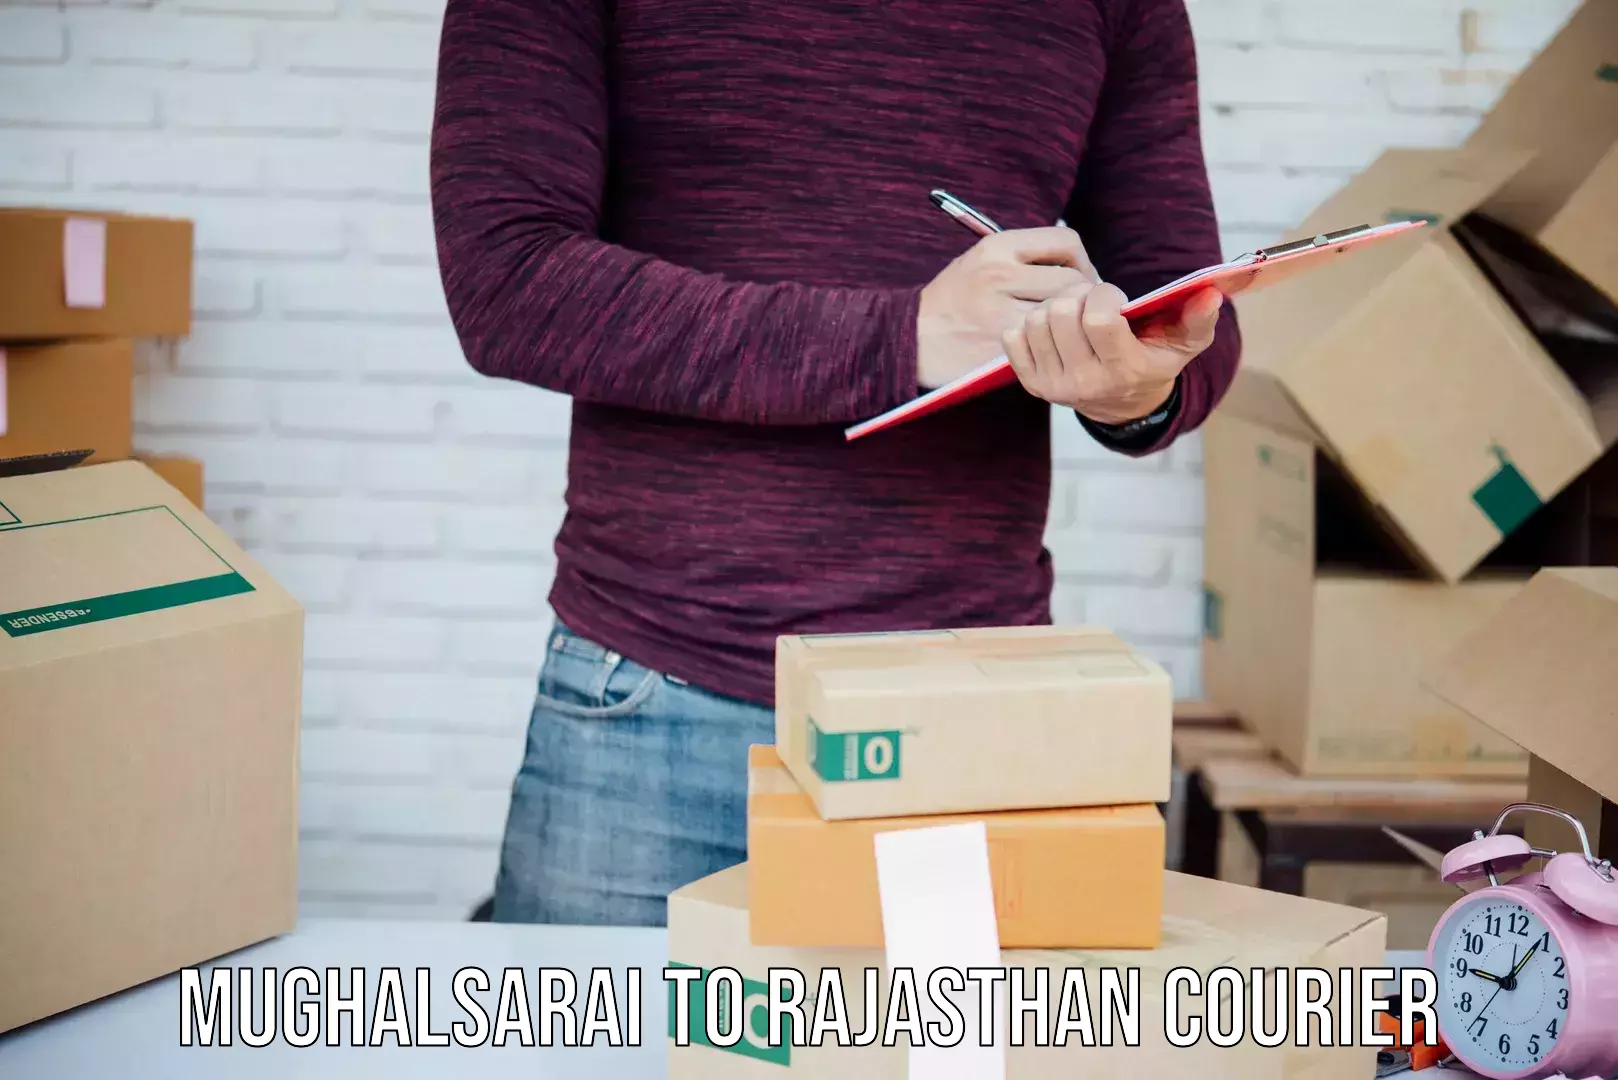 Full-service courier options Mughalsarai to Rajasthan